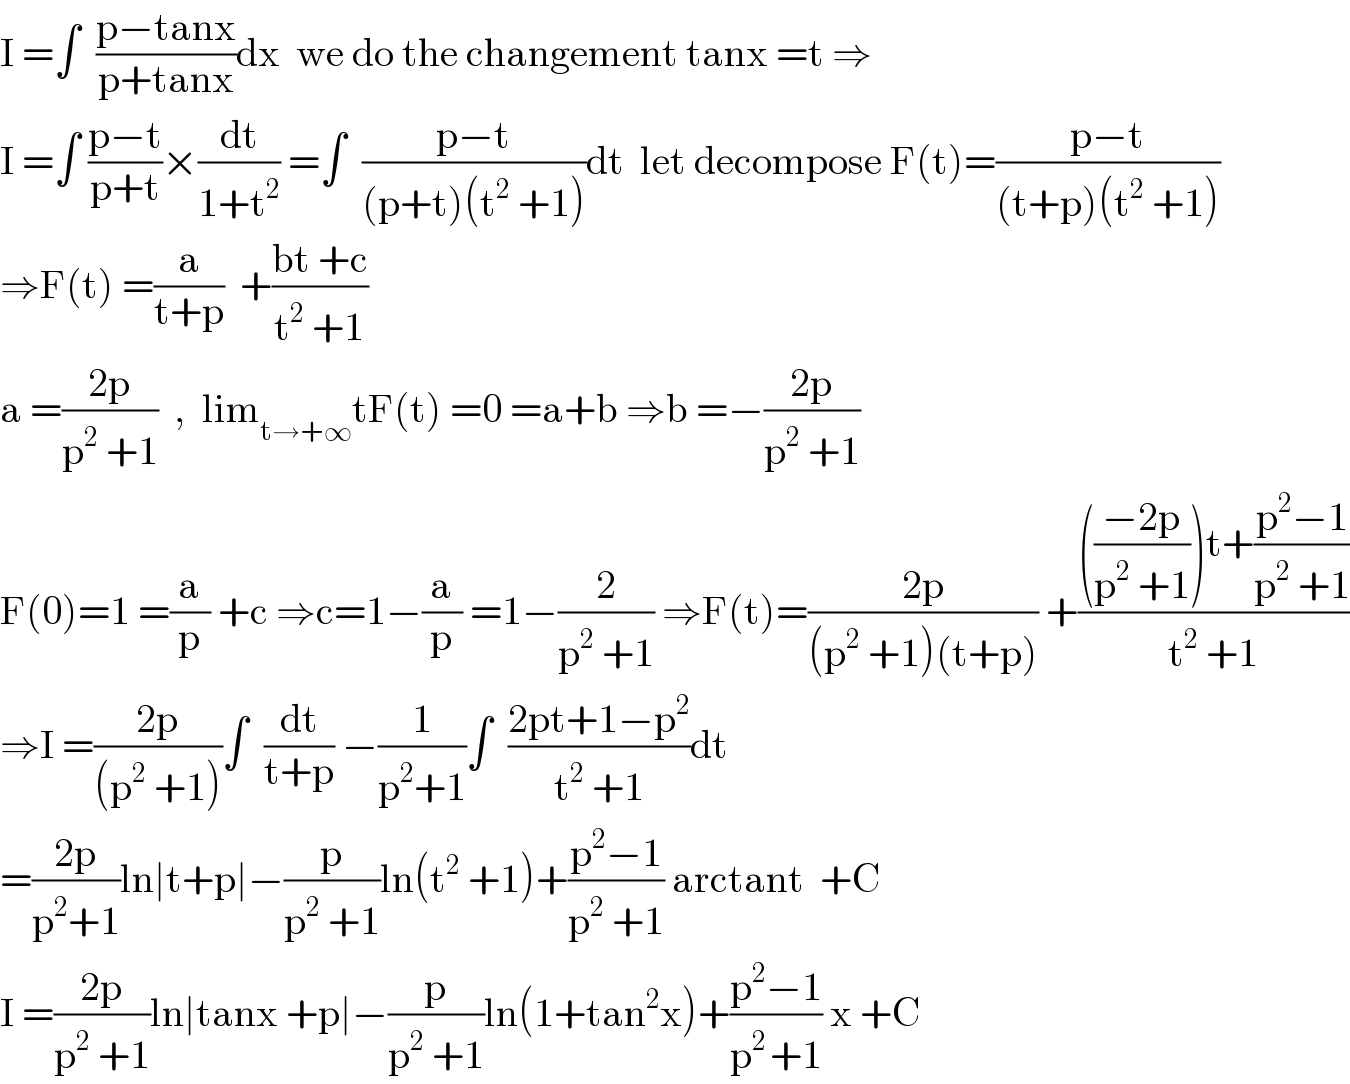 I =∫  ((p−tanx)/(p+tanx))dx  we do the changement tanx =t ⇒  I =∫ ((p−t)/(p+t))×(dt/(1+t^2 )) =∫  ((p−t)/((p+t)(t^2  +1)))dt  let decompose F(t)=((p−t)/((t+p)(t^2  +1)))  ⇒F(t) =(a/(t+p))  +((bt +c)/(t^2  +1))  a =((2p)/(p^2  +1))  ,  lim_(t→+∞) tF(t) =0 =a+b ⇒b =−((2p)/(p^2  +1))   F(0)=1 =(a/p) +c ⇒c=1−(a/p) =1−(2/(p^2  +1)) ⇒F(t)=((2p)/((p^2  +1)(t+p))) +(((((−2p)/(p^2  +1)))t+((p^2 −1)/(p^2  +1)))/(t^2  +1))  ⇒I =((2p)/((p^2  +1)))∫  (dt/(t+p)) −(1/(p^2 +1))∫  ((2pt+1−p^2 )/(t^2  +1))dt  =((2p)/(p^2 +1))ln∣t+p∣−(p/(p^2  +1))ln(t^2  +1)+((p^2 −1)/(p^2  +1)) arctant  +C  I =((2p)/(p^2  +1))ln∣tanx +p∣−(p/(p^2  +1))ln(1+tan^2 x)+((p^2 −1)/(p^(2 ) +1)) x +C  